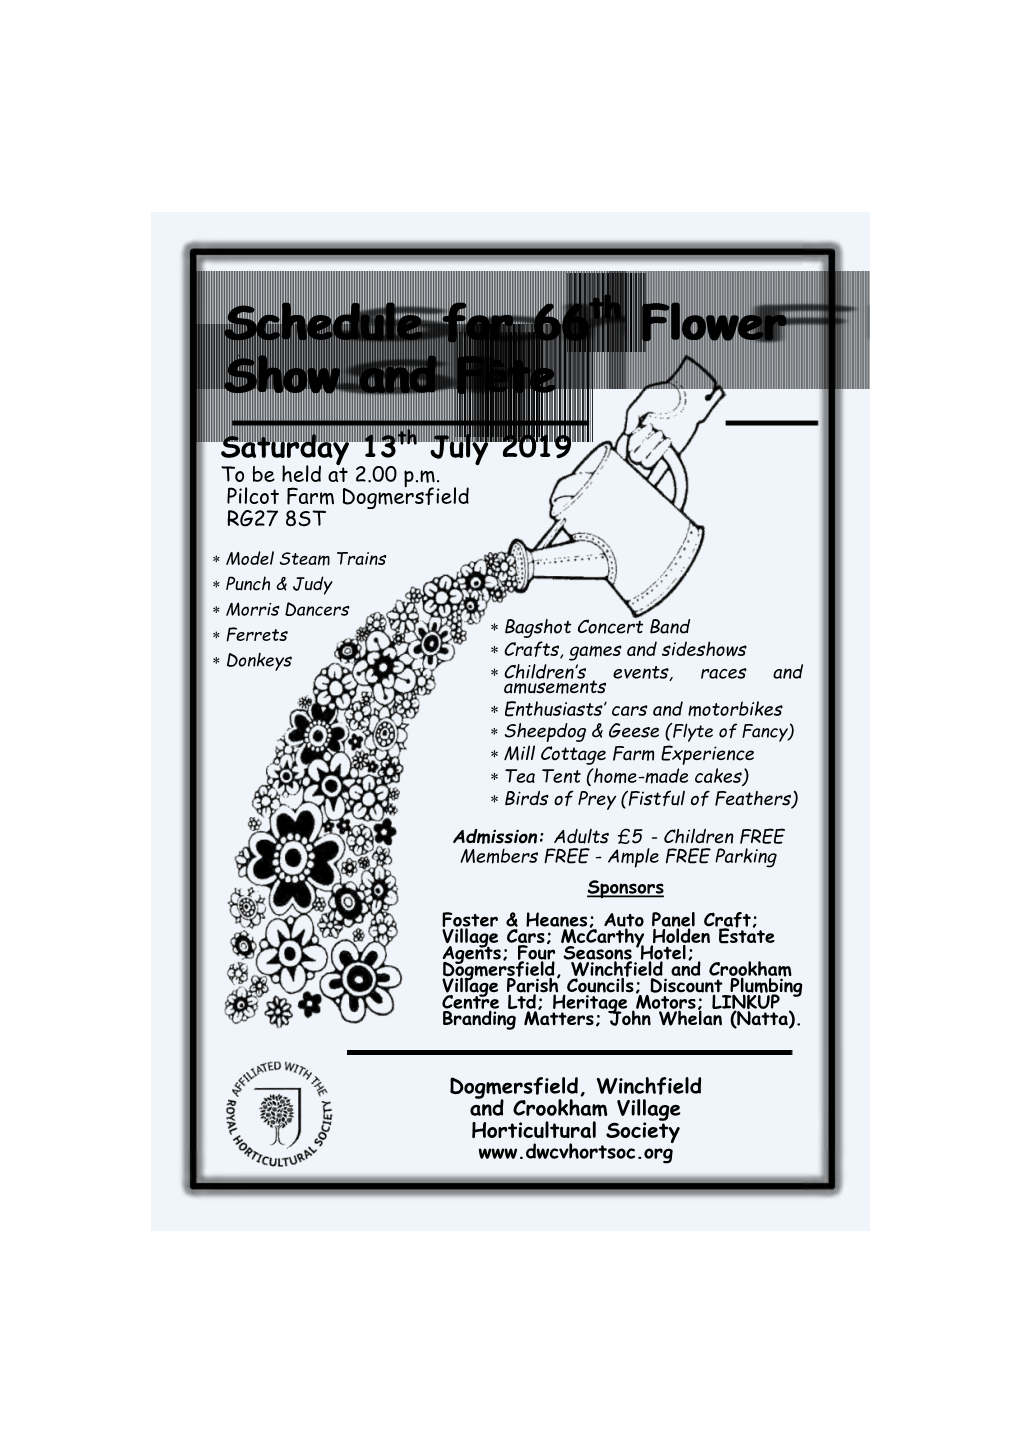 Schedule for 66 Th Flower Show and F Show and Fêêtete